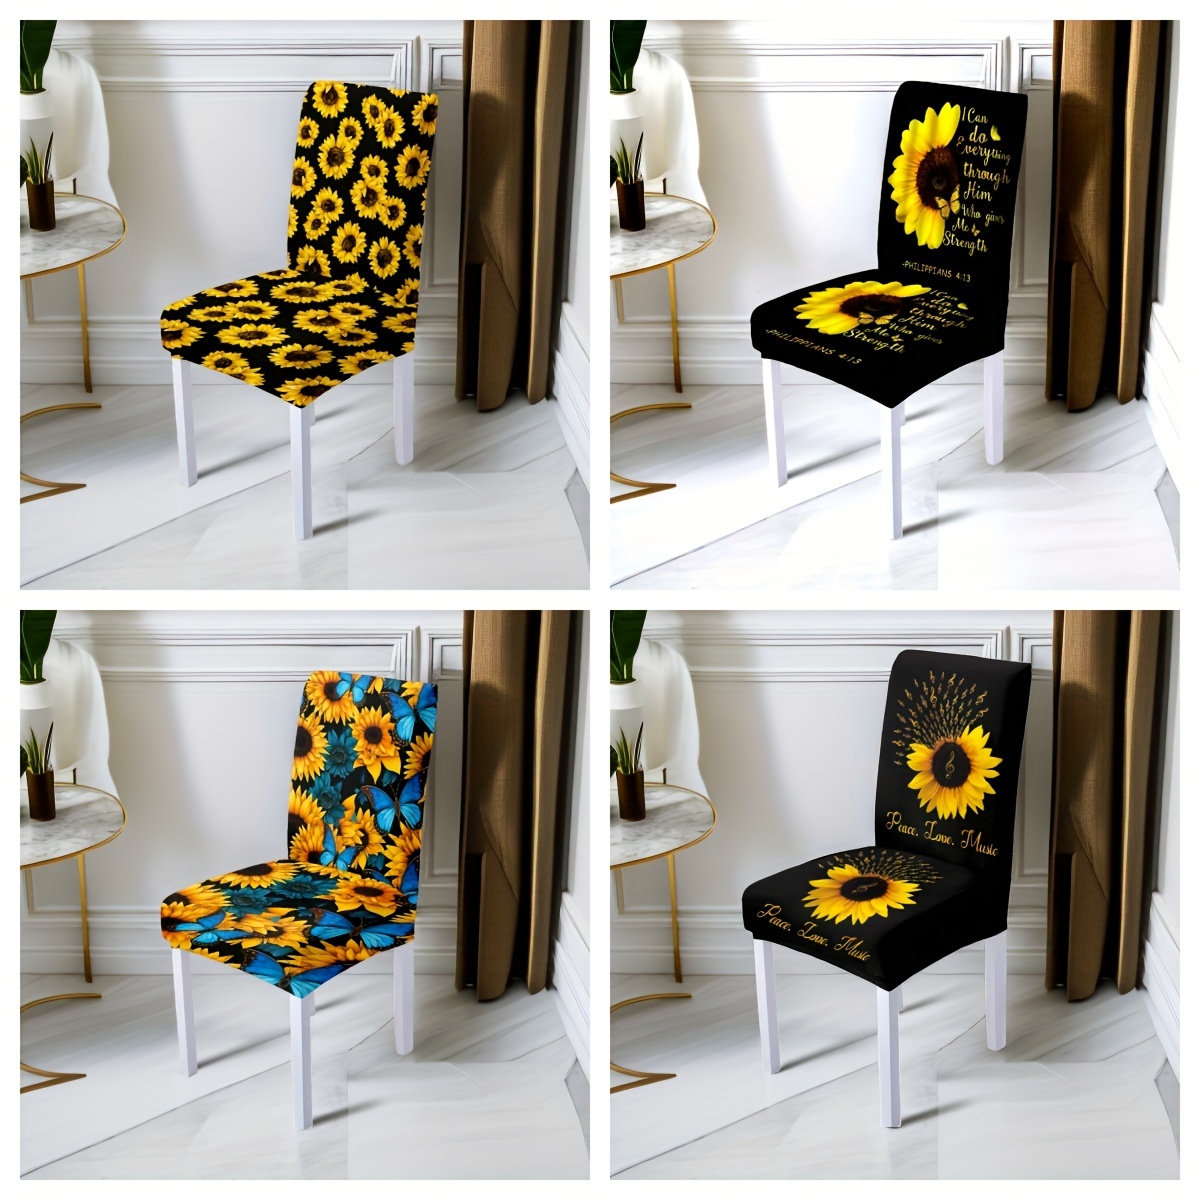 1pc Chair Covers Elastic Seat Cover Soft Durable Removable